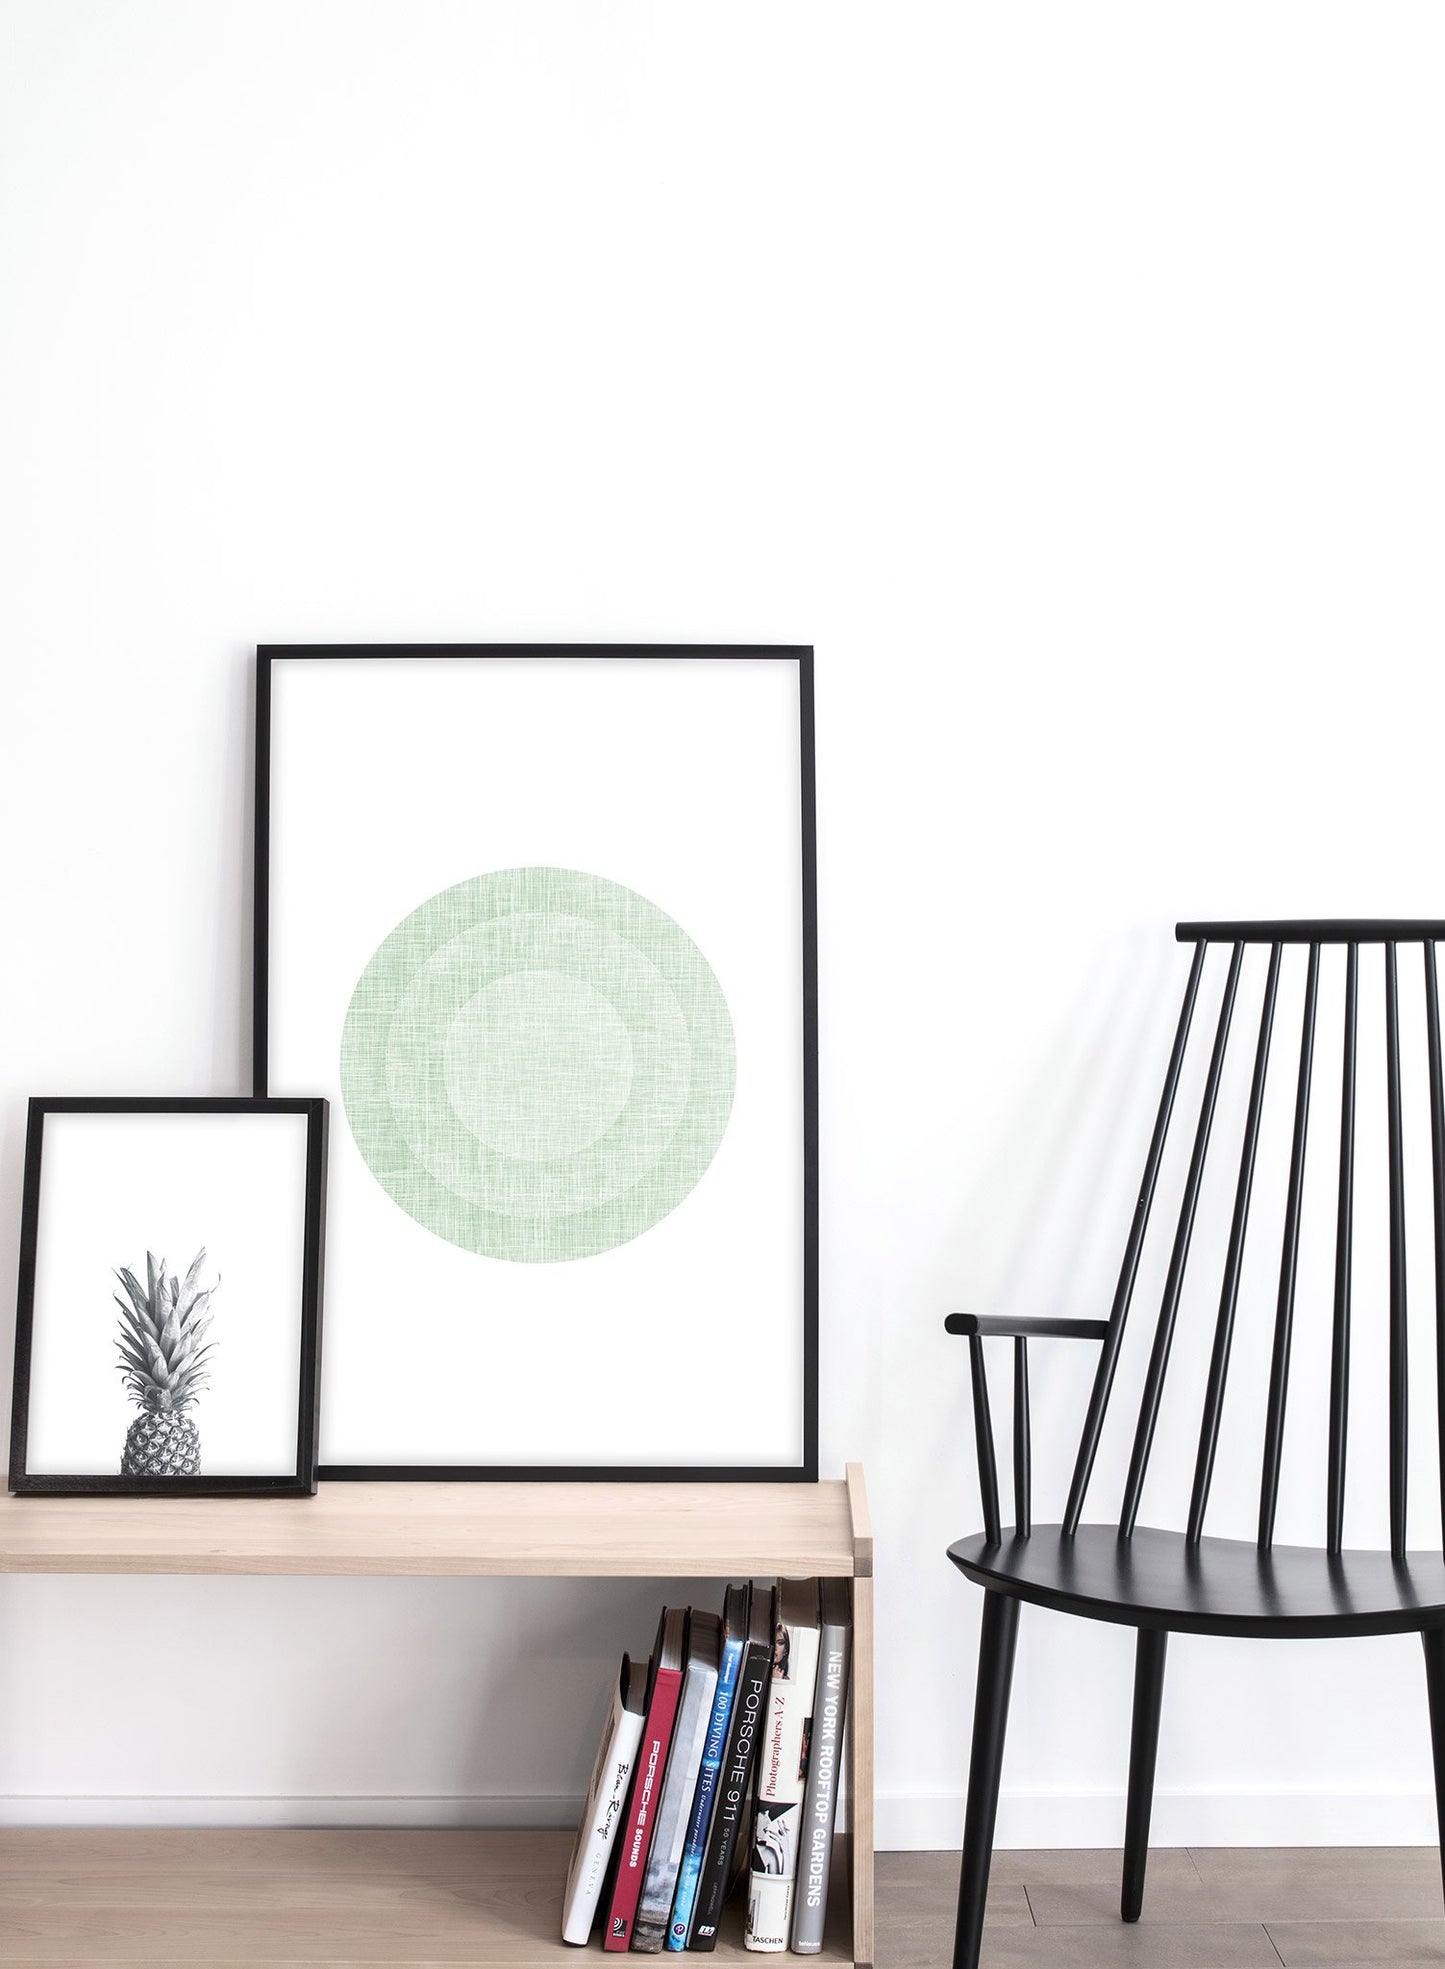 Minimalist design poster by Opposite Wall with abstract green circles in target shape - Lifestyle Duo - Living Room